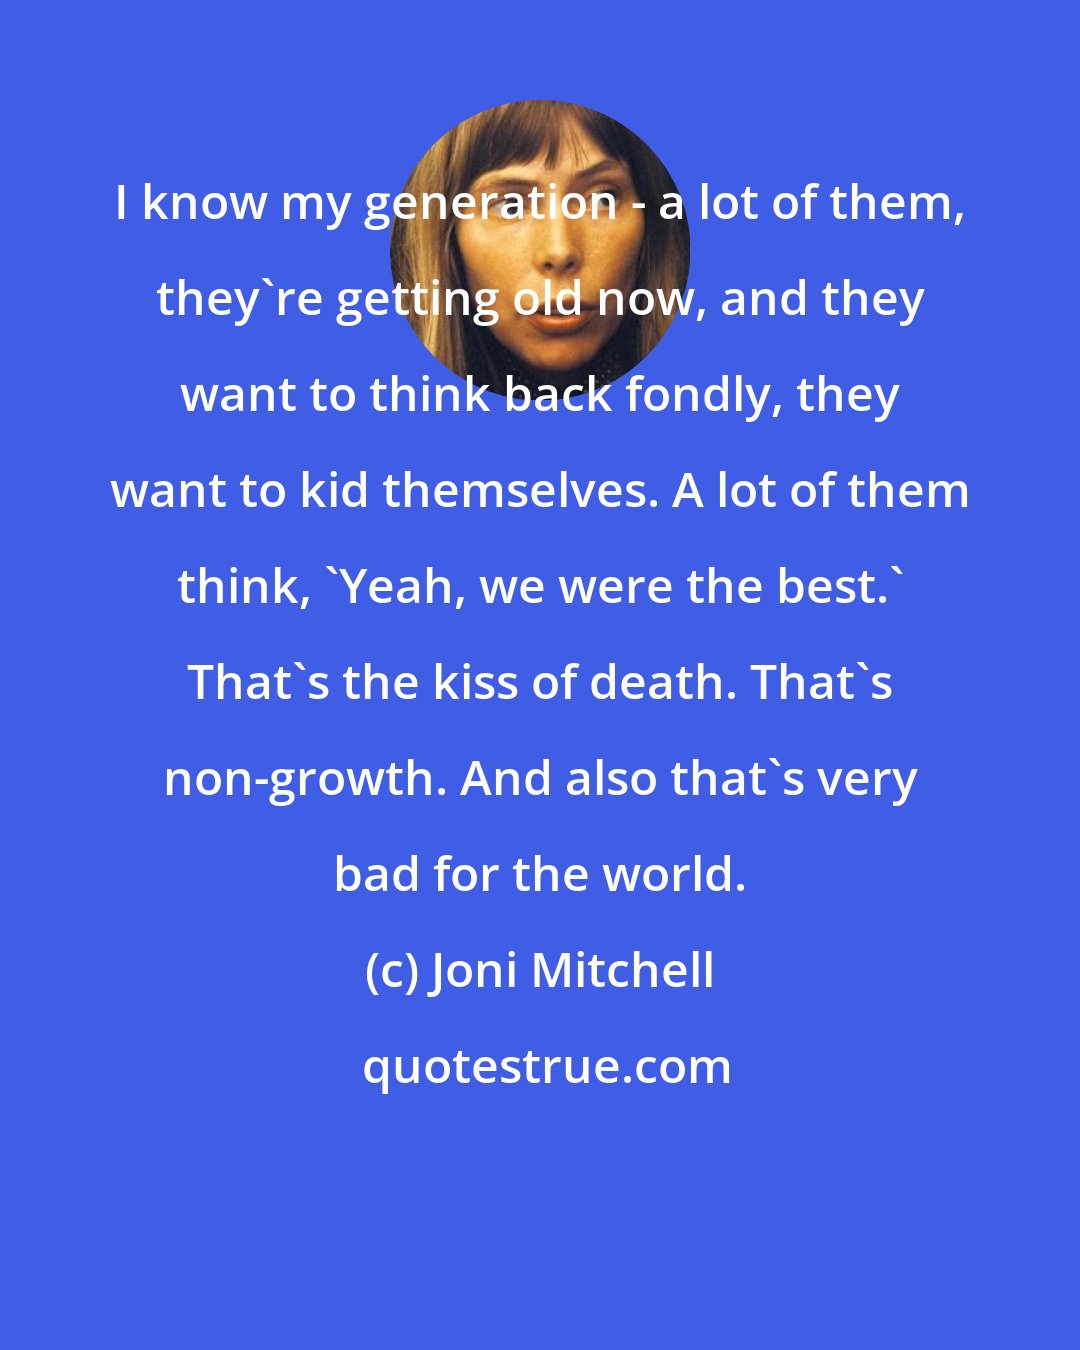 Joni Mitchell: I know my generation - a lot of them, they're getting old now, and they want to think back fondly, they want to kid themselves. A lot of them think, 'Yeah, we were the best.' That's the kiss of death. That's non-growth. And also that's very bad for the world.